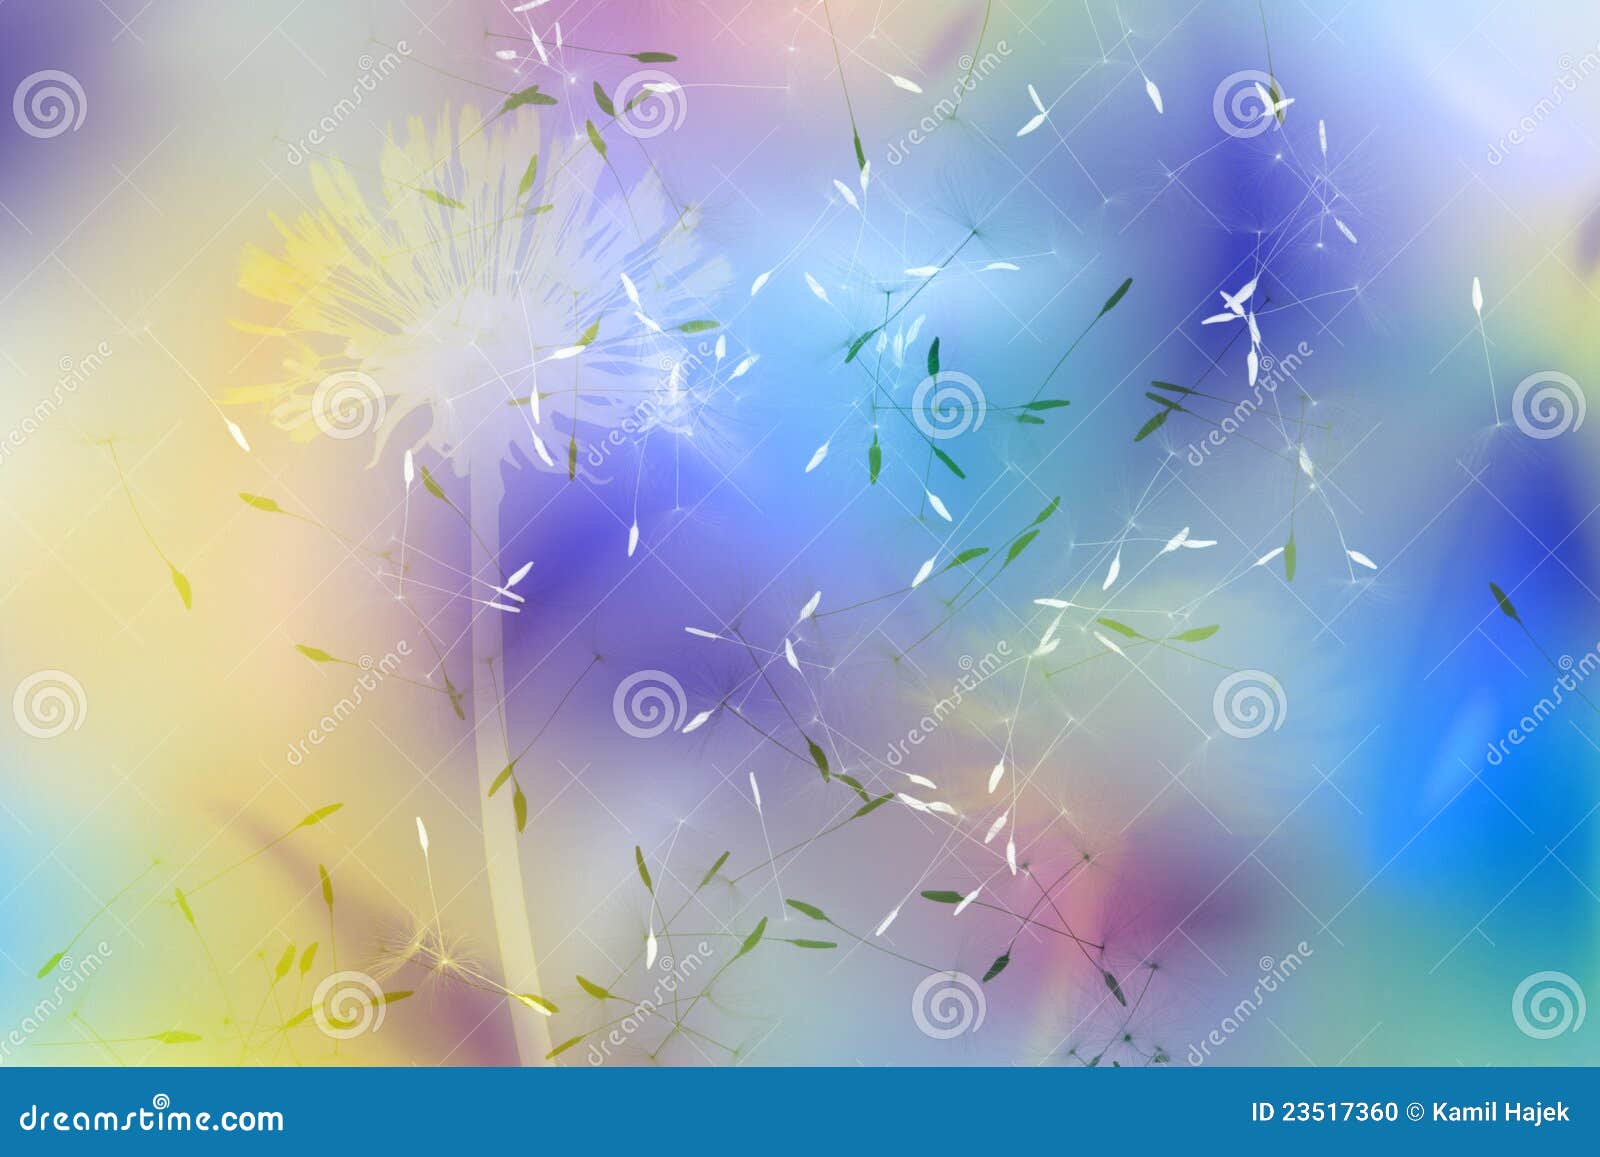 1,438,656 Positive Background Stock Photos - Free & Royalty-Free Stock  Photos from Dreamstime